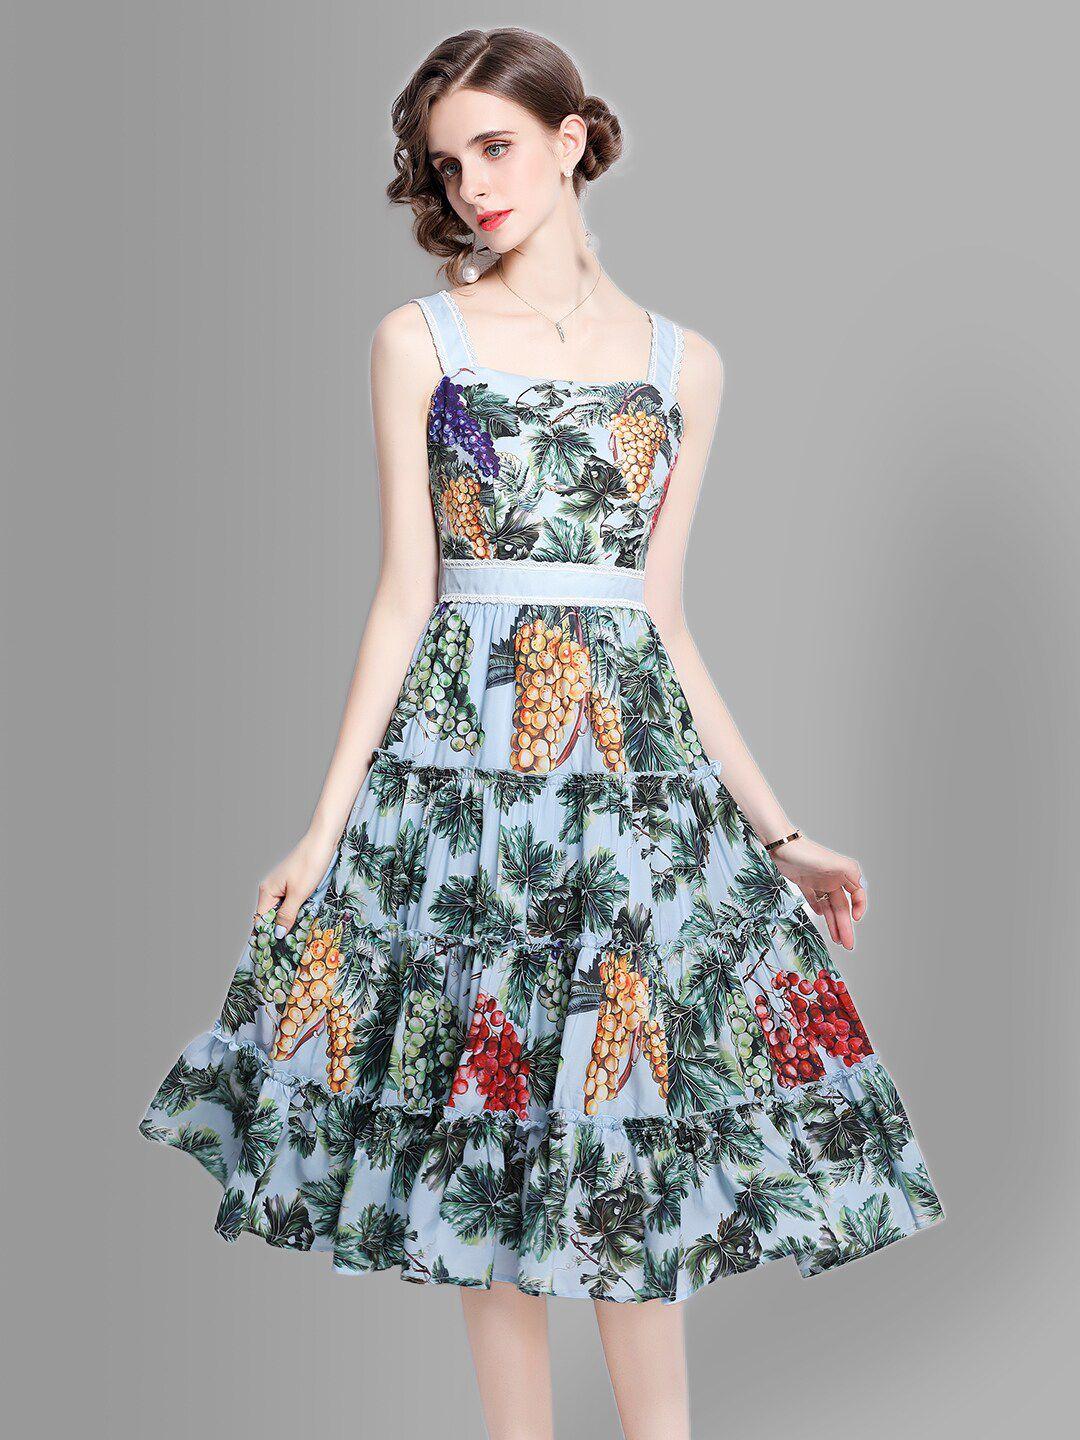 jc-collection-turquoise-blue-&-green-floral-midi-dress